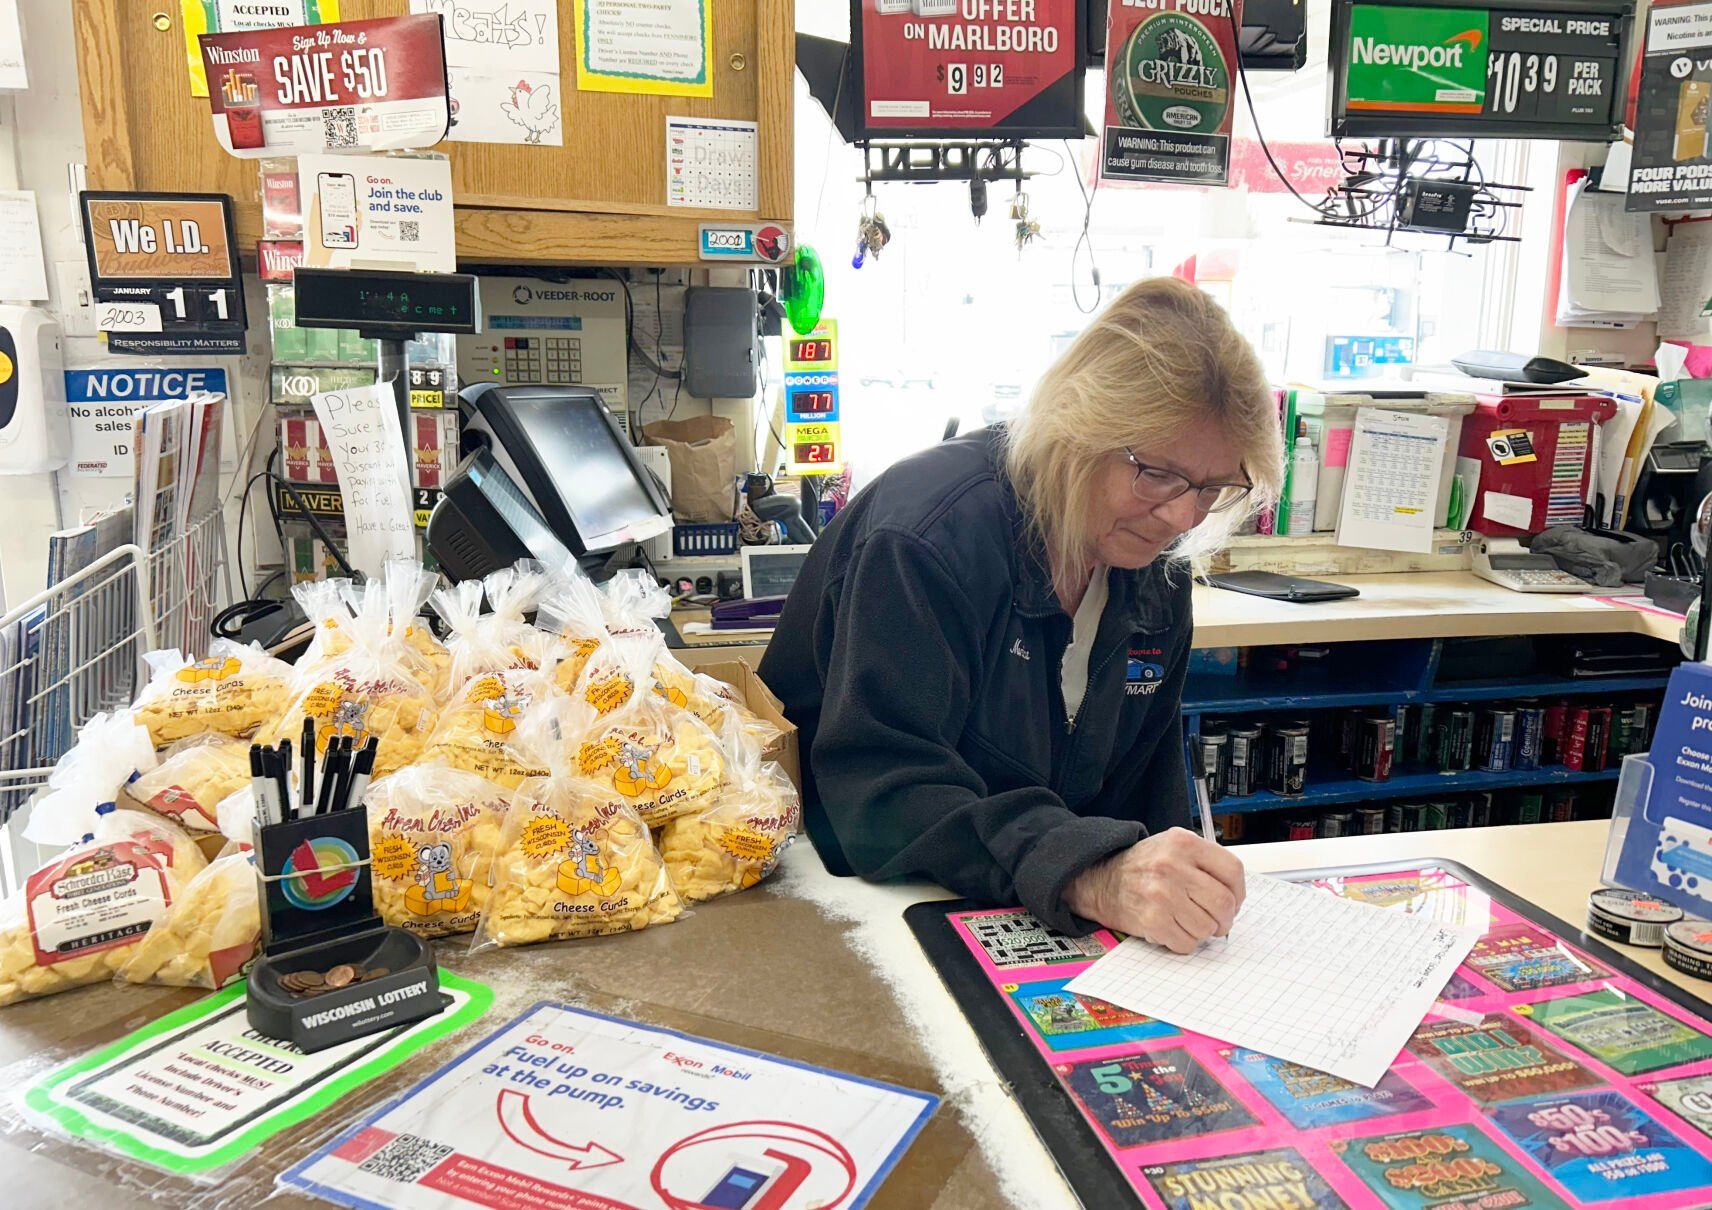 Employee Monica Fritz fills out paperwork. Fritz is one of four employees at the convenience store and has worked at the business for 10 years.    PHOTO CREDIT: Erik Hogstrom
Telegraph Herald